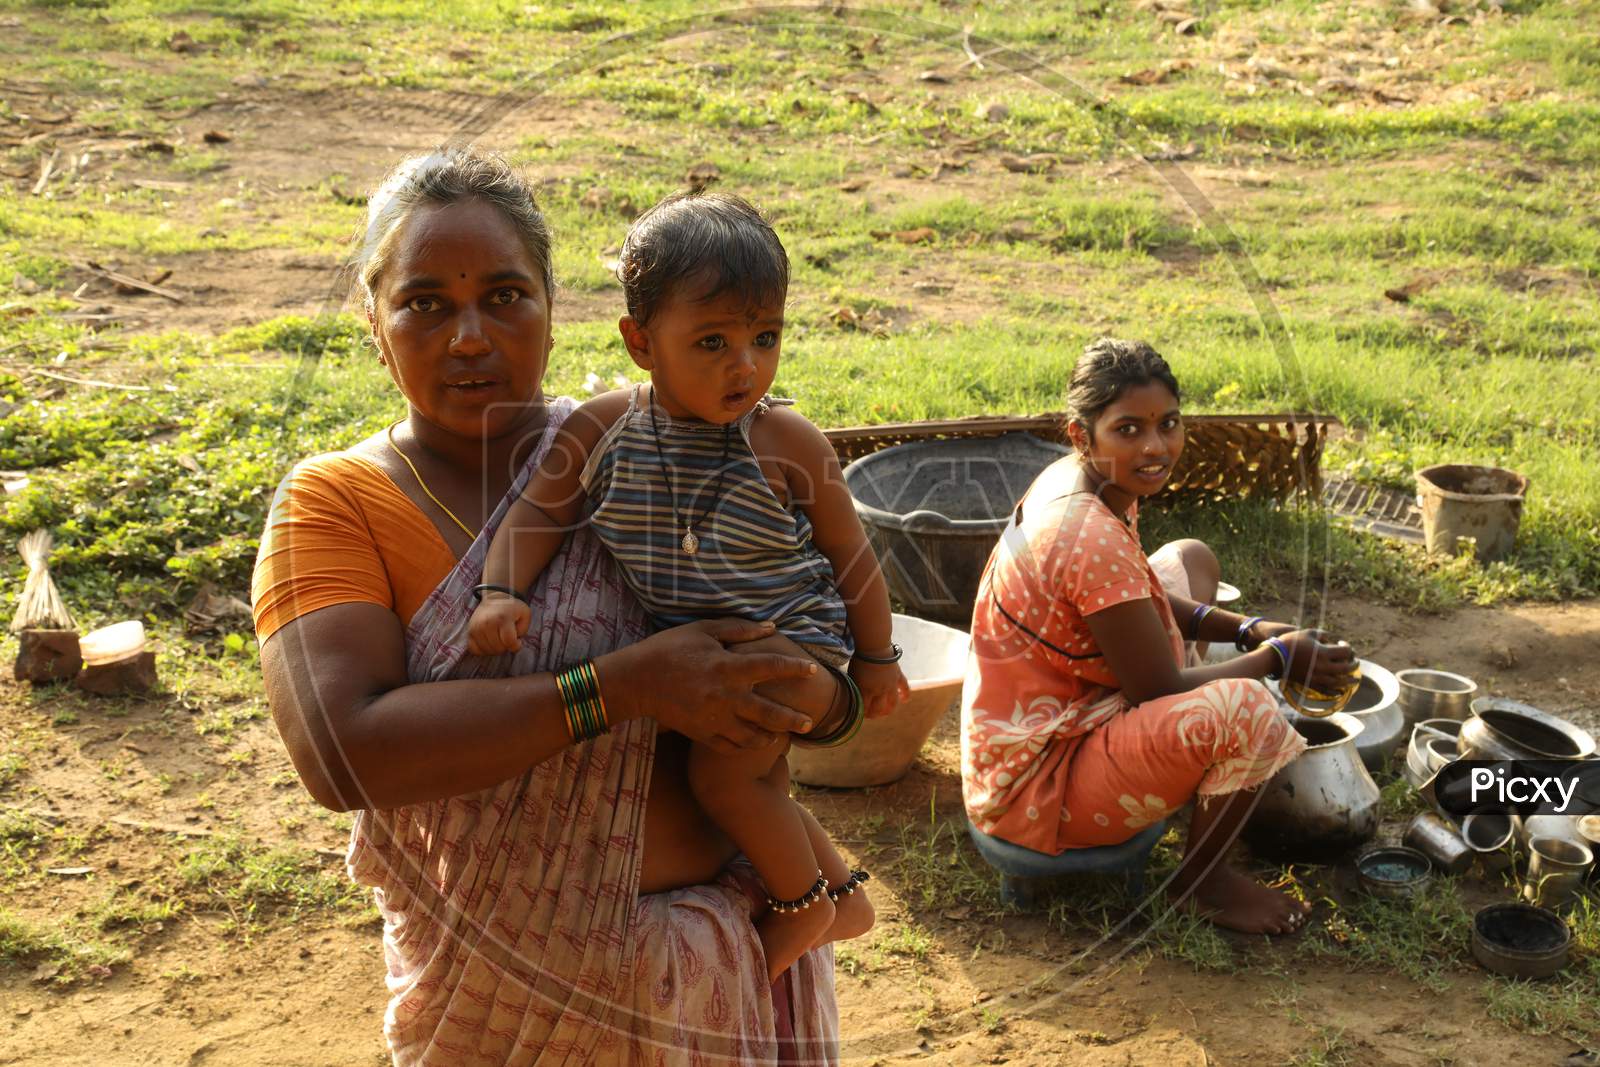 Indian Woman At Rural Village Houses With Children